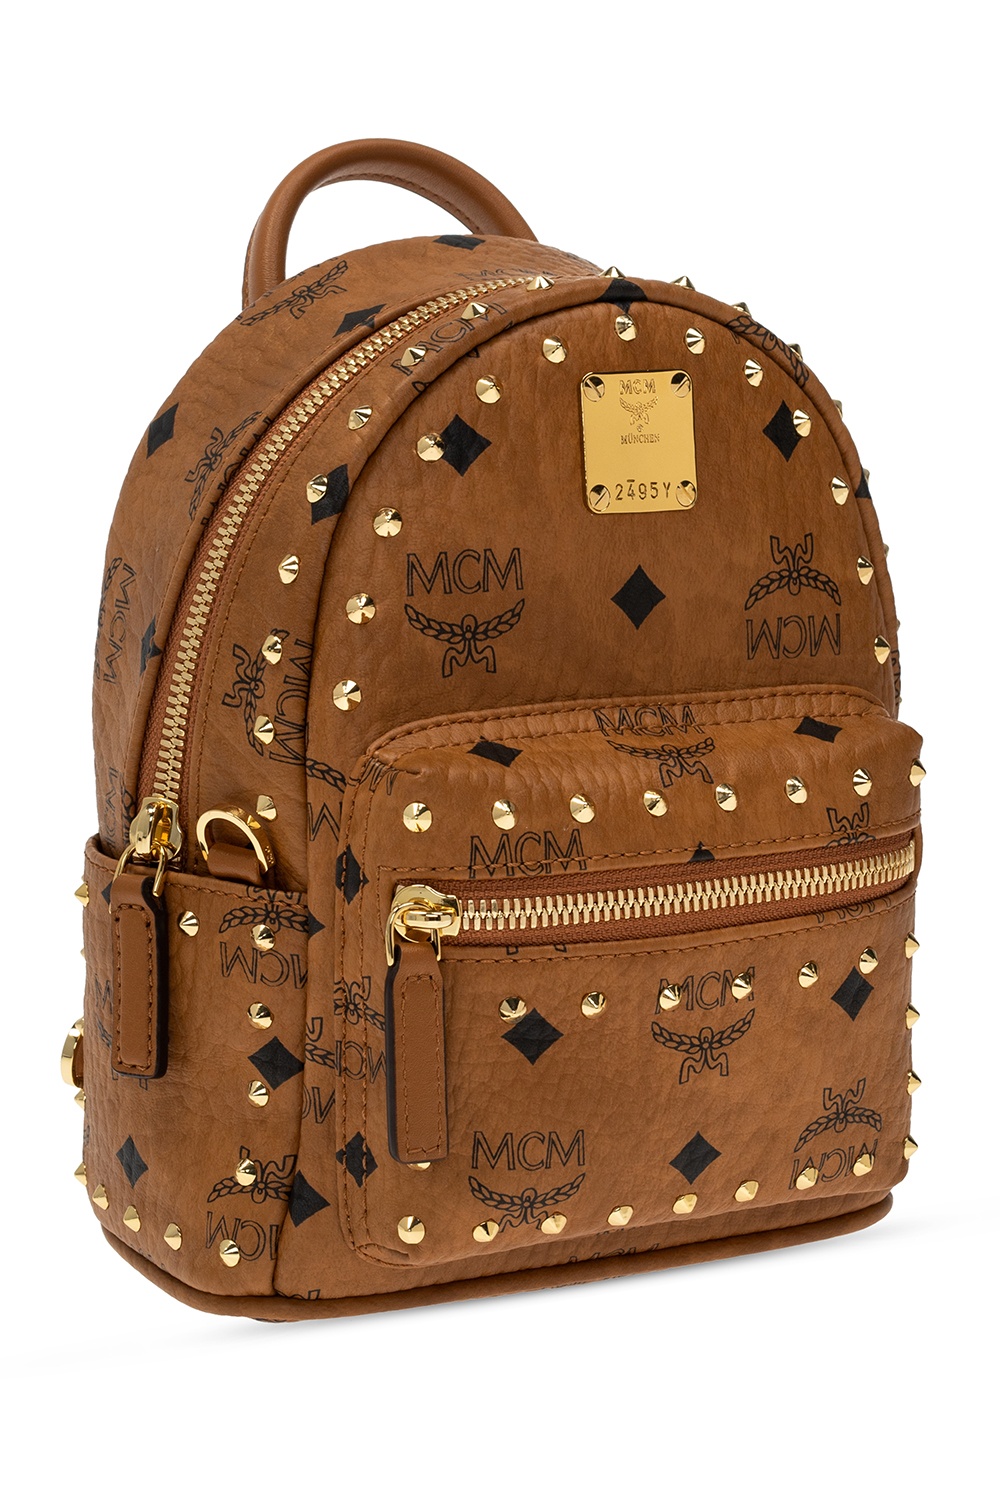 Best 100% Authentic Mcm Bookbag (paypal Payment Only) for sale in Jackson,  Mississippi for 2023